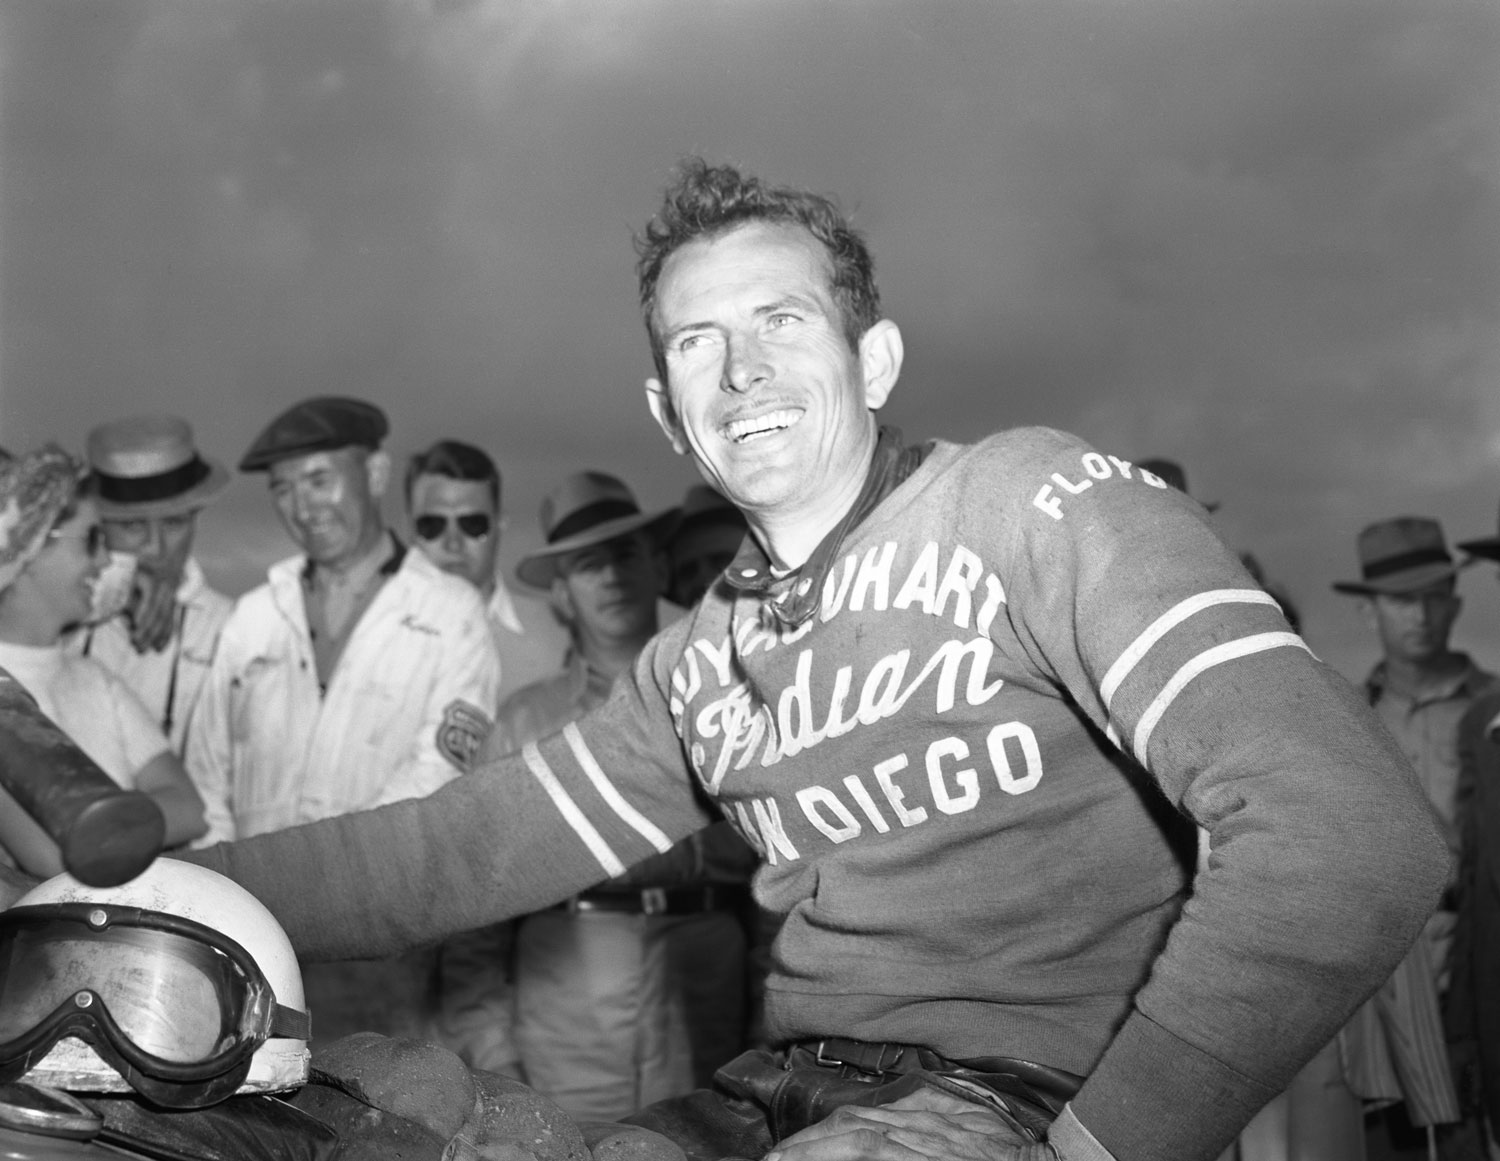 Floyd Emde rests on his Indian motorcycle after winning the 1948 running of the Daytona 200.